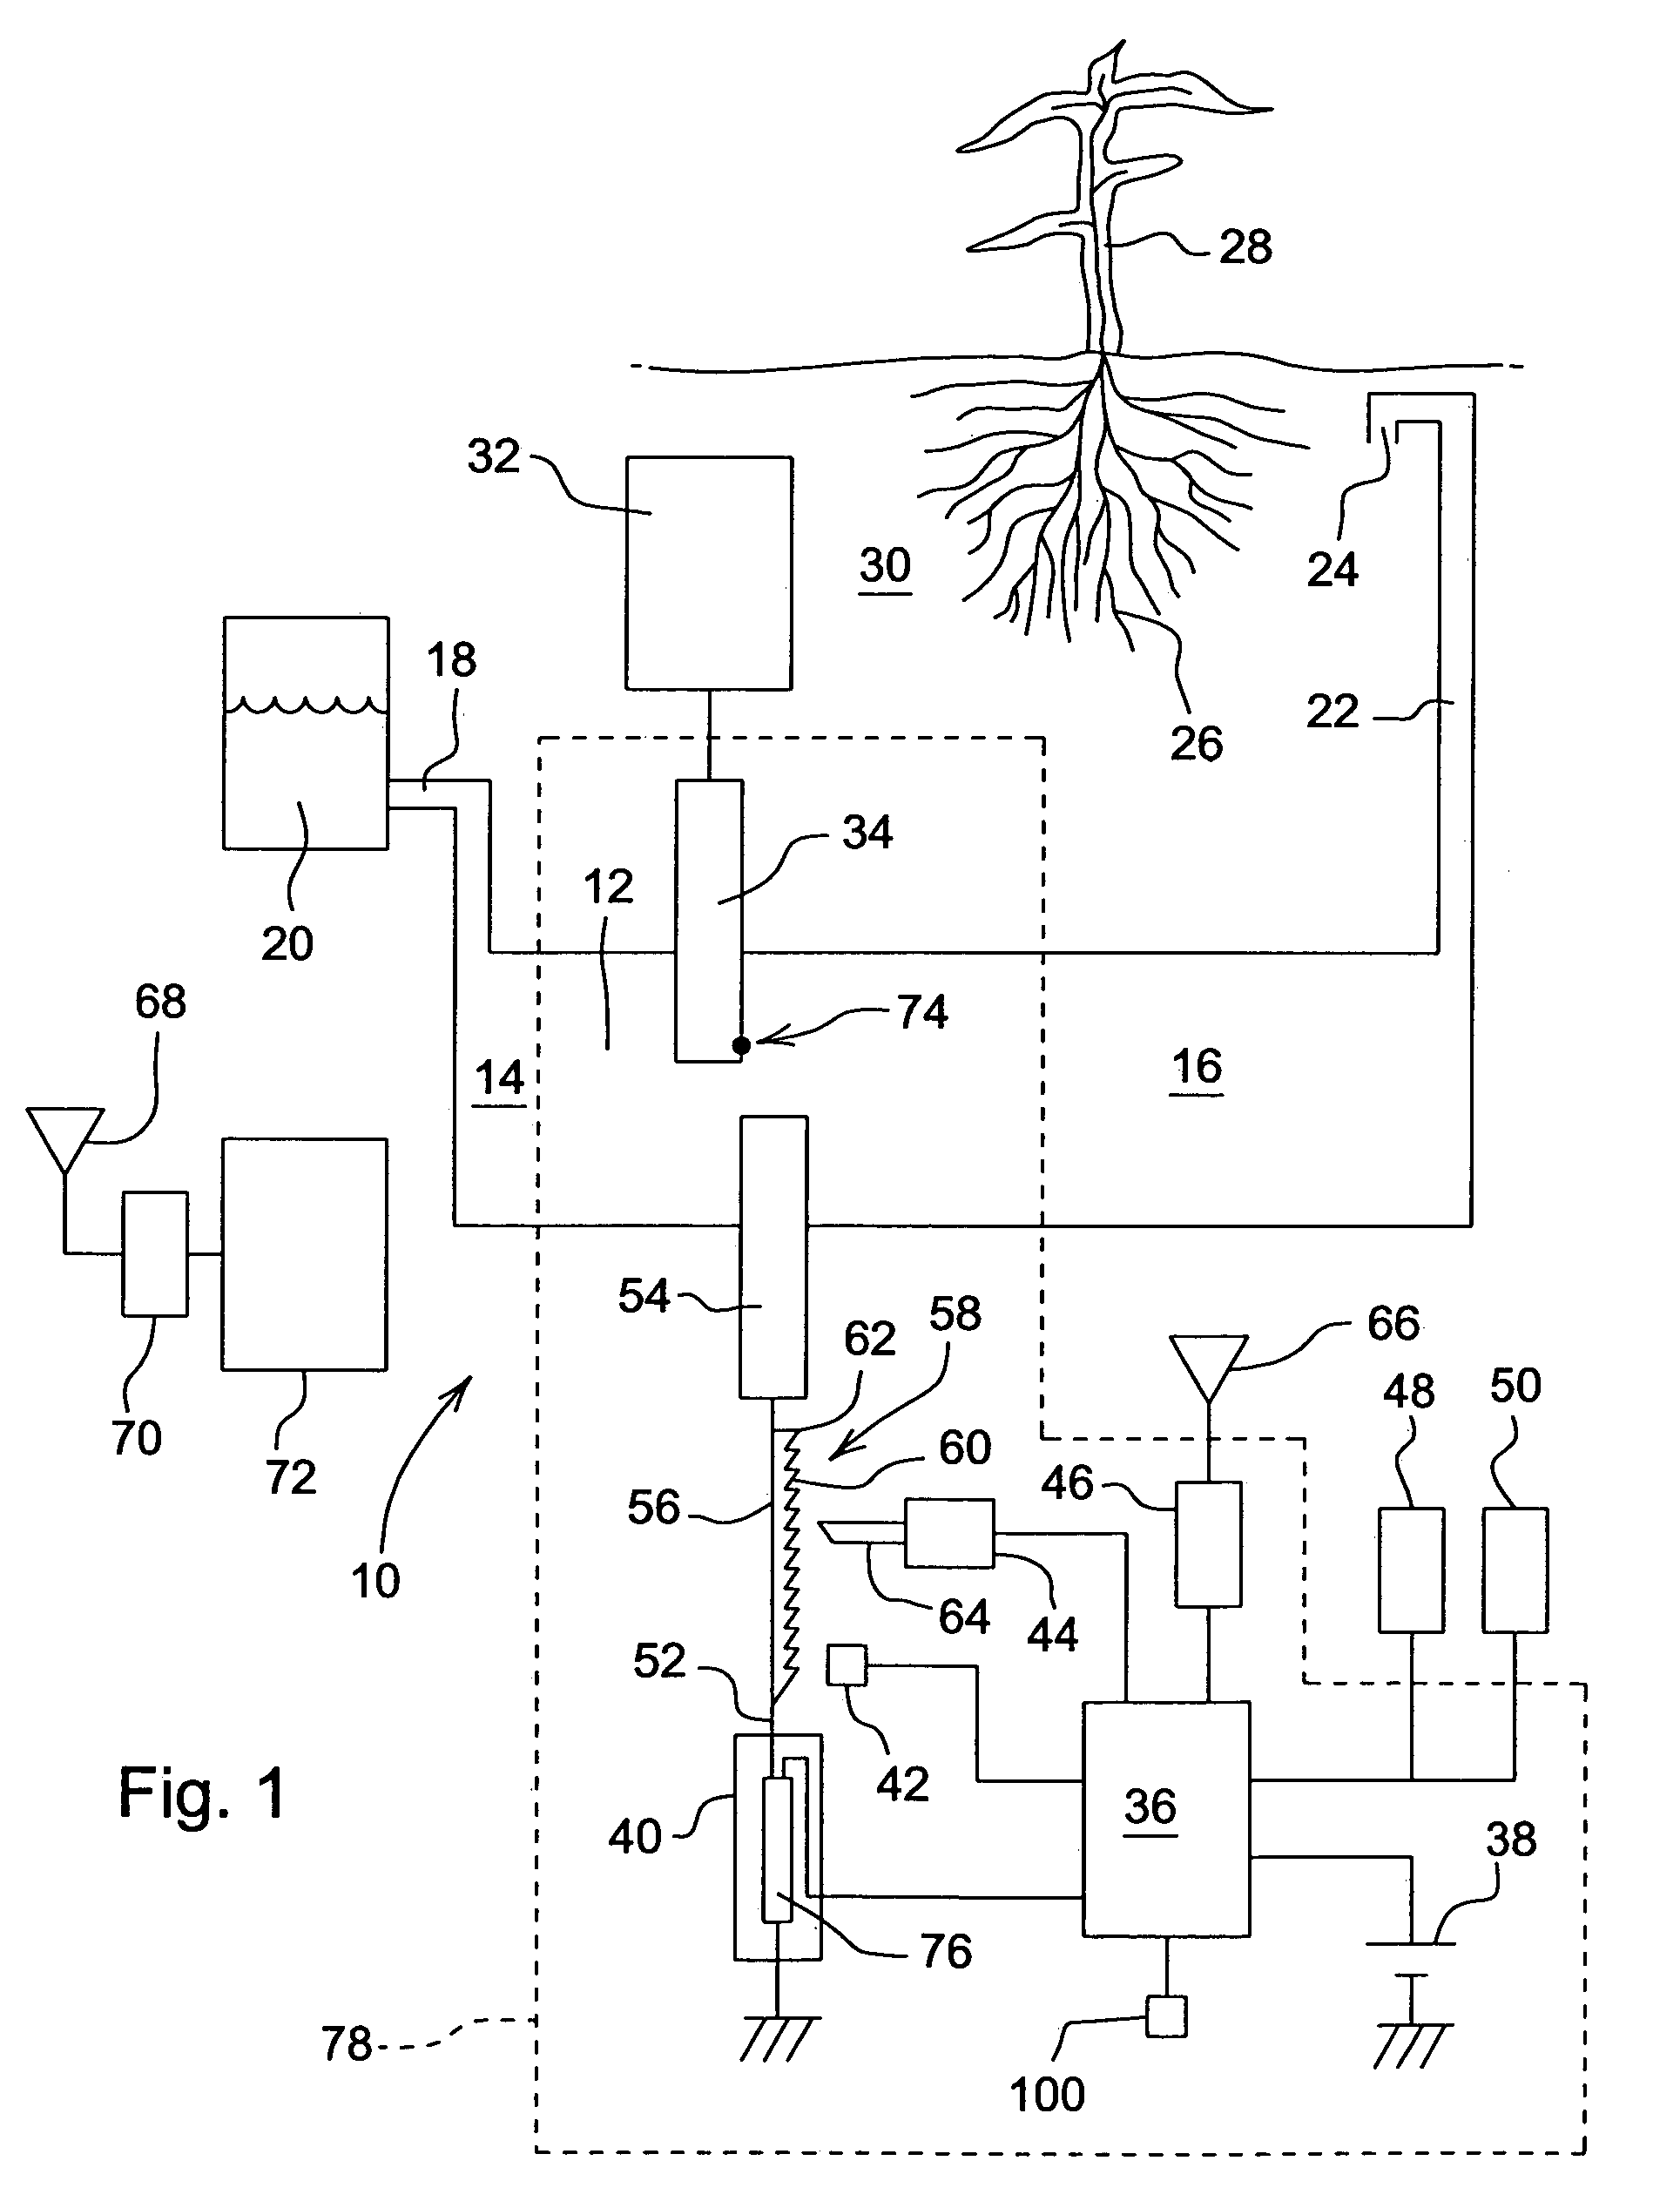 Irrigation control valve and system